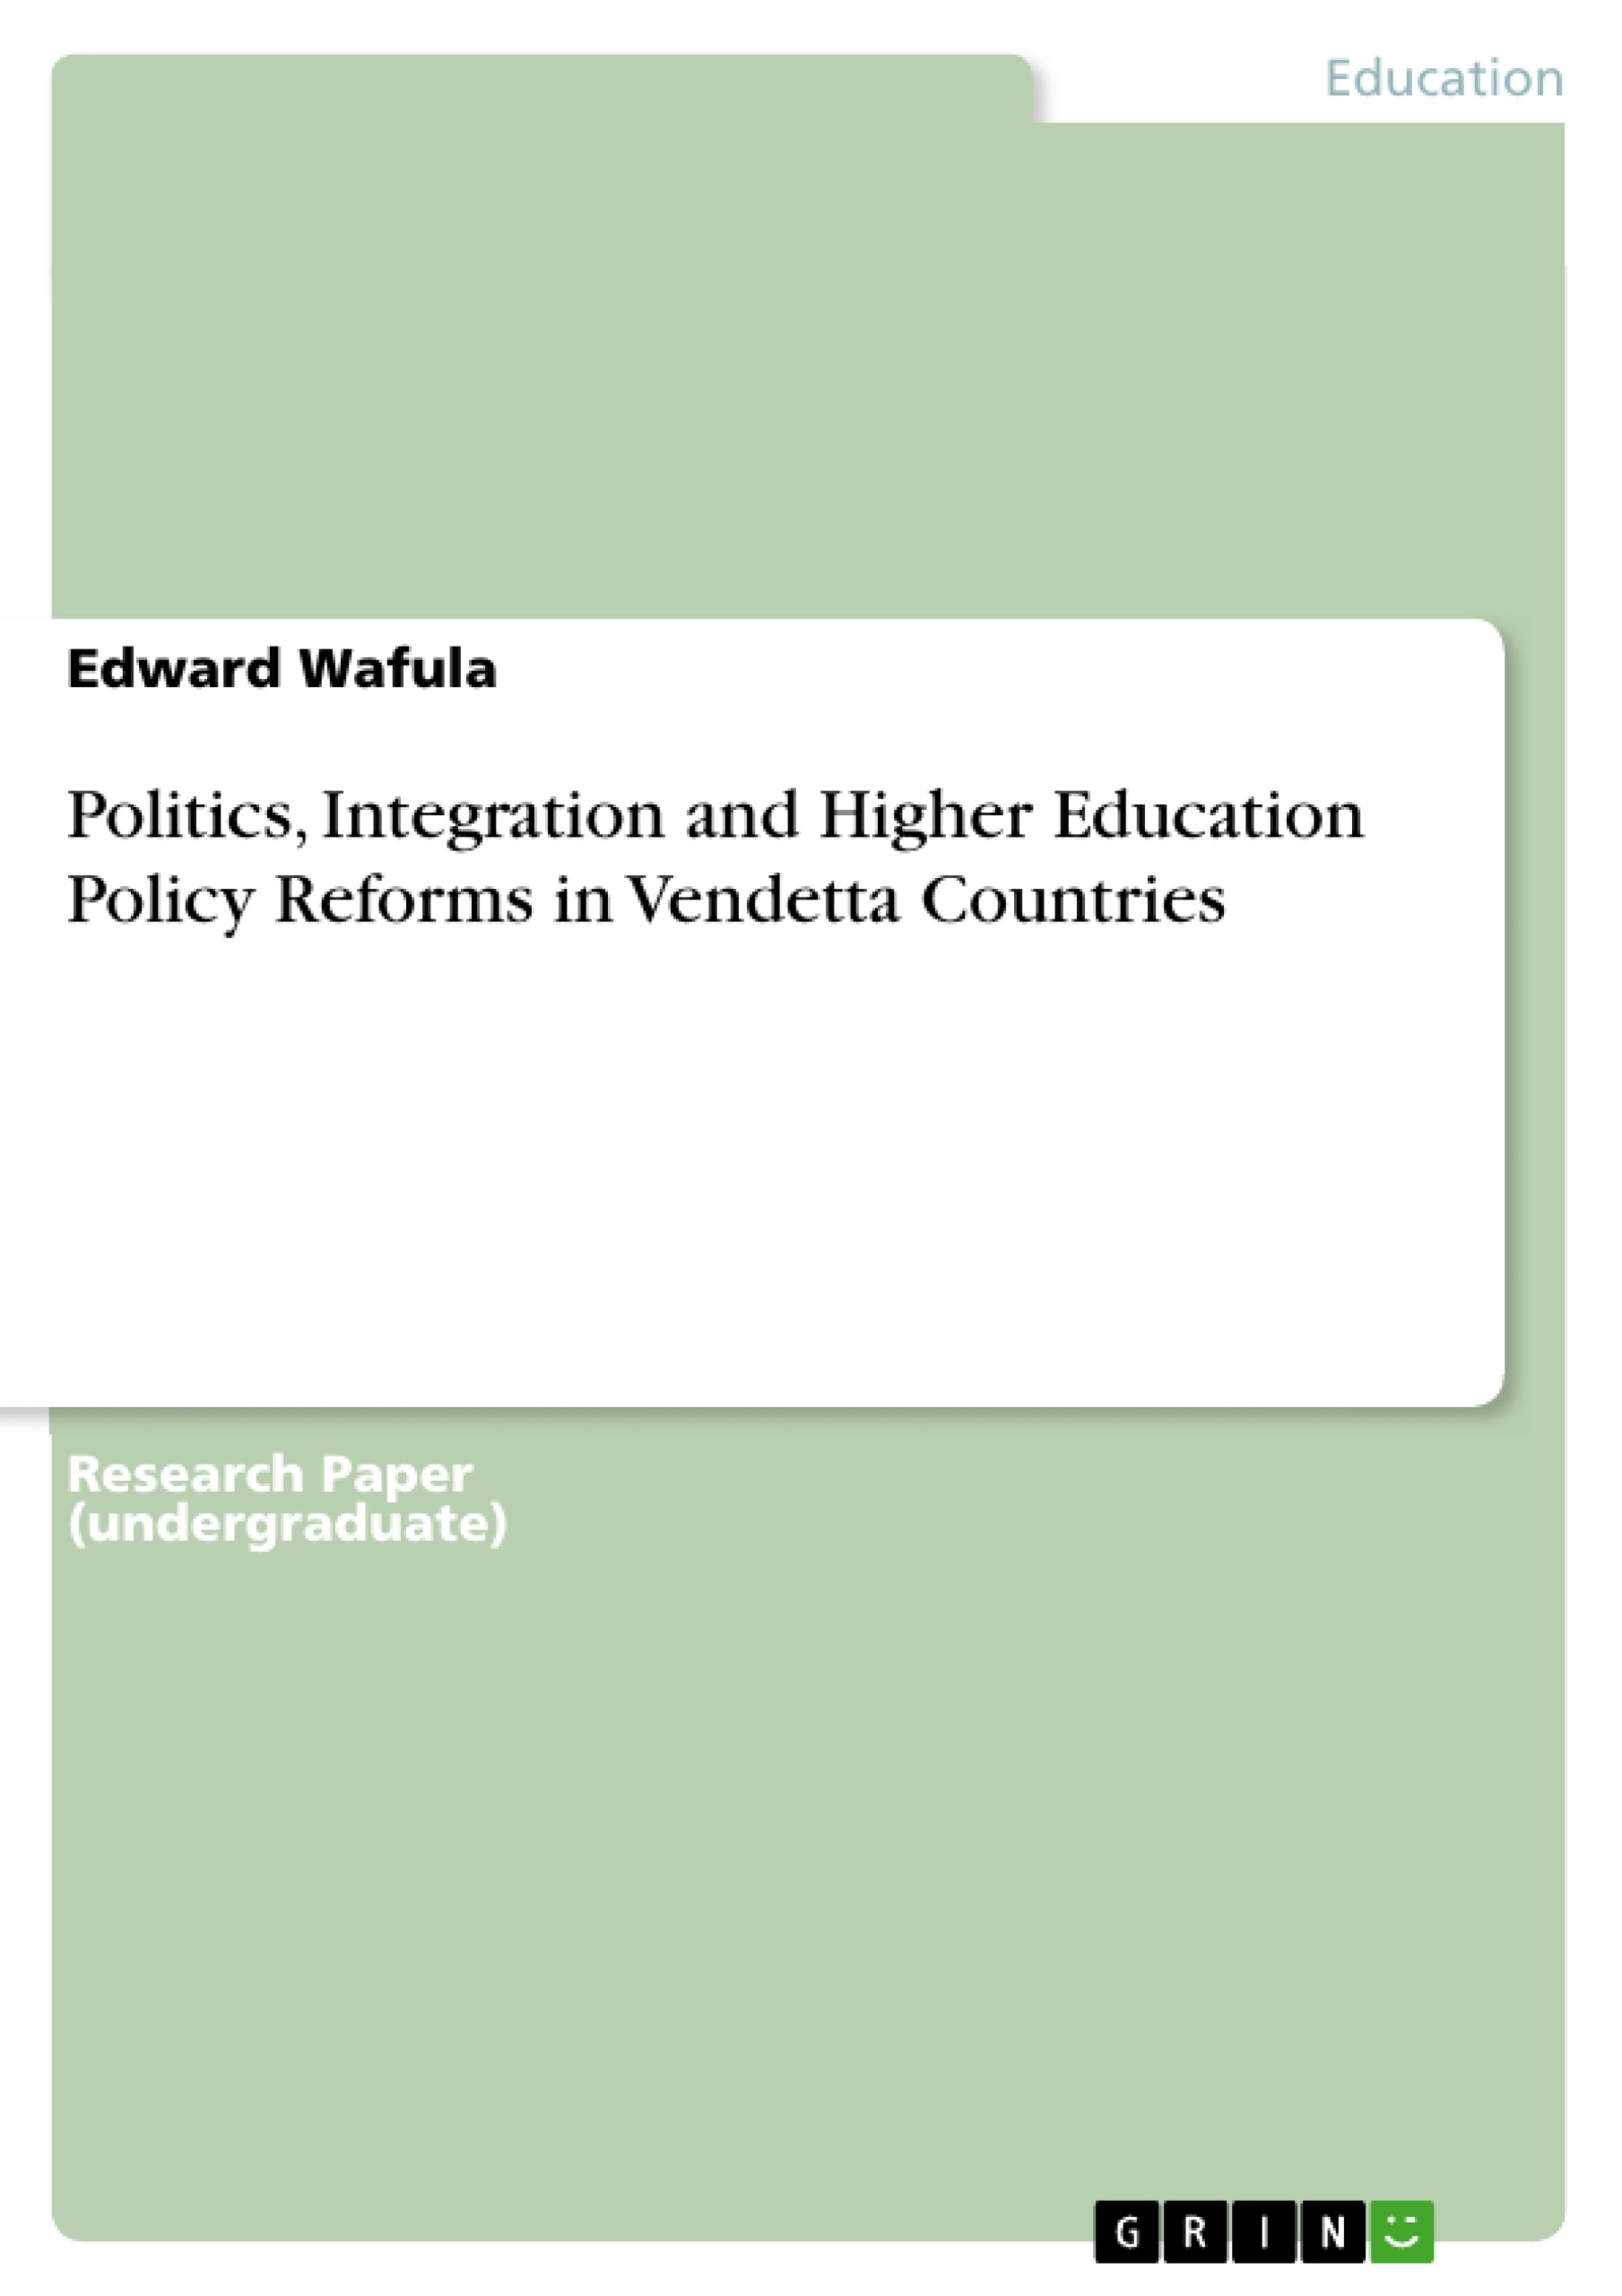 Title: Politics, Integration and Higher Education Policy Reforms in Vendetta Countries